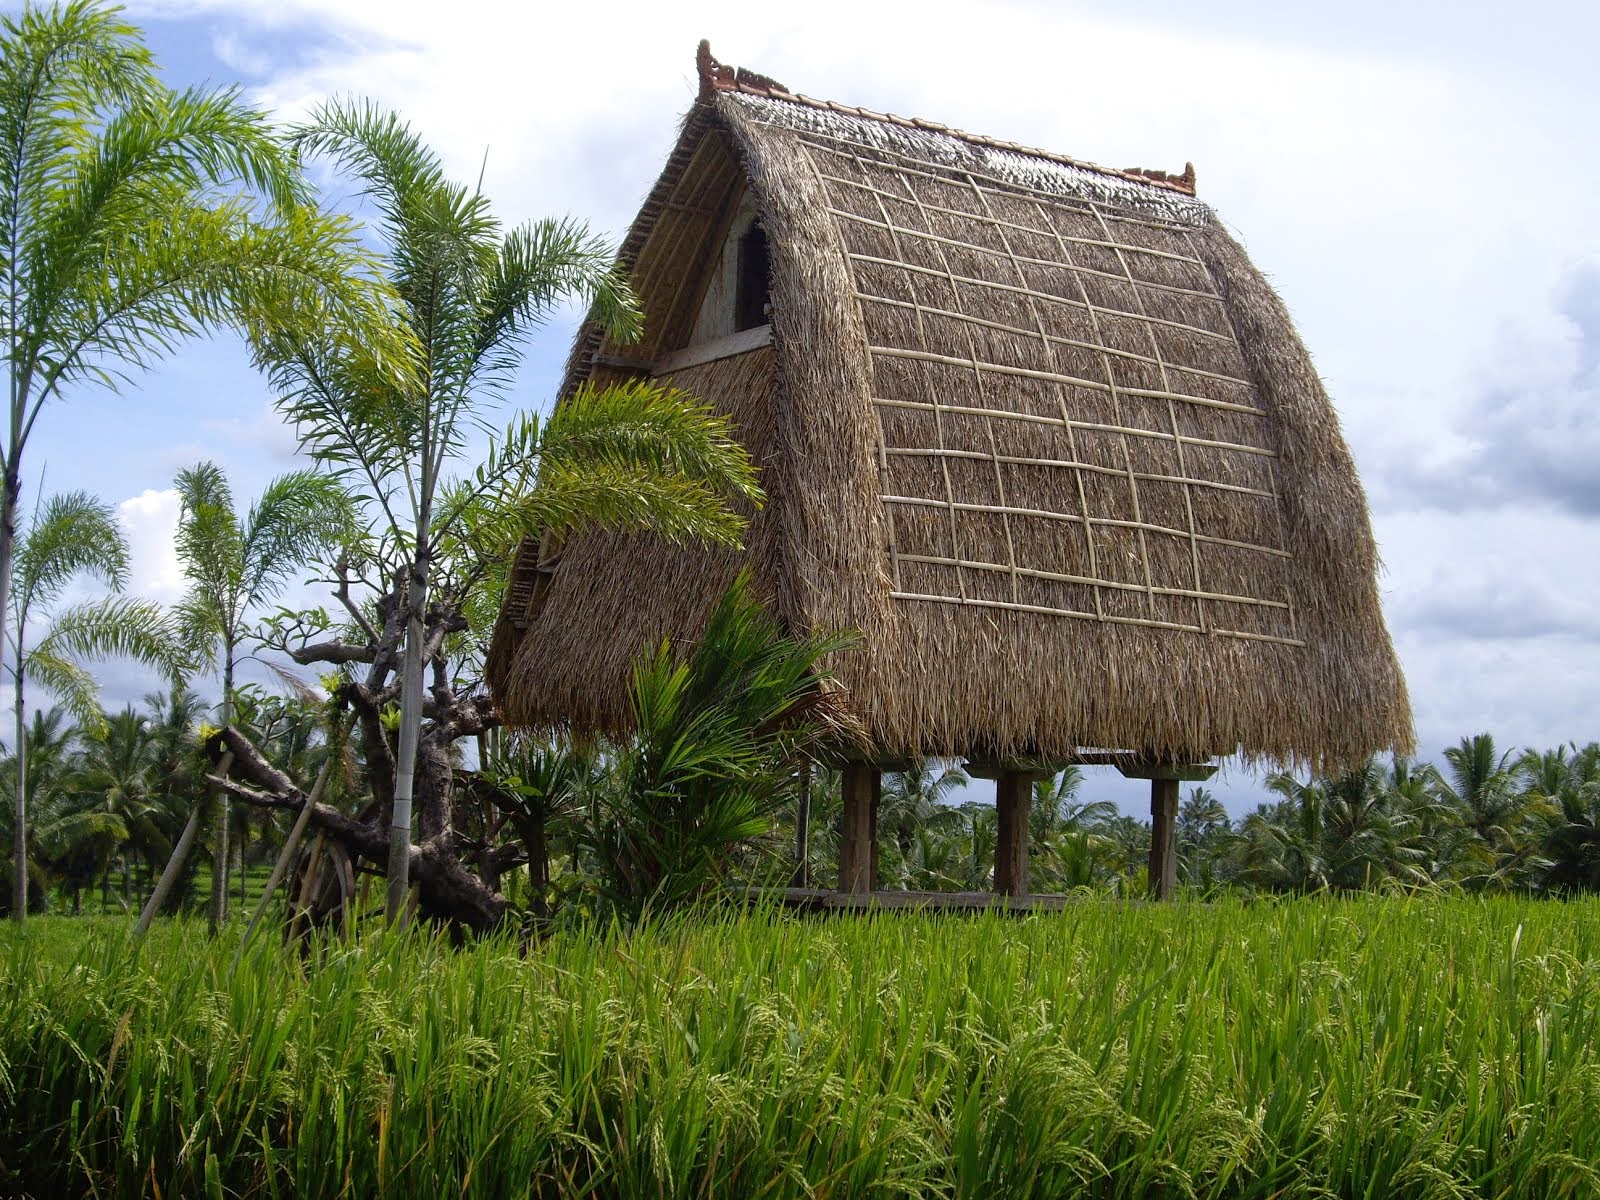 LUMBUNG--TRADITIONAL BALINESE RICE STORAGE GRANARY TO STORE THE RICE CROPS